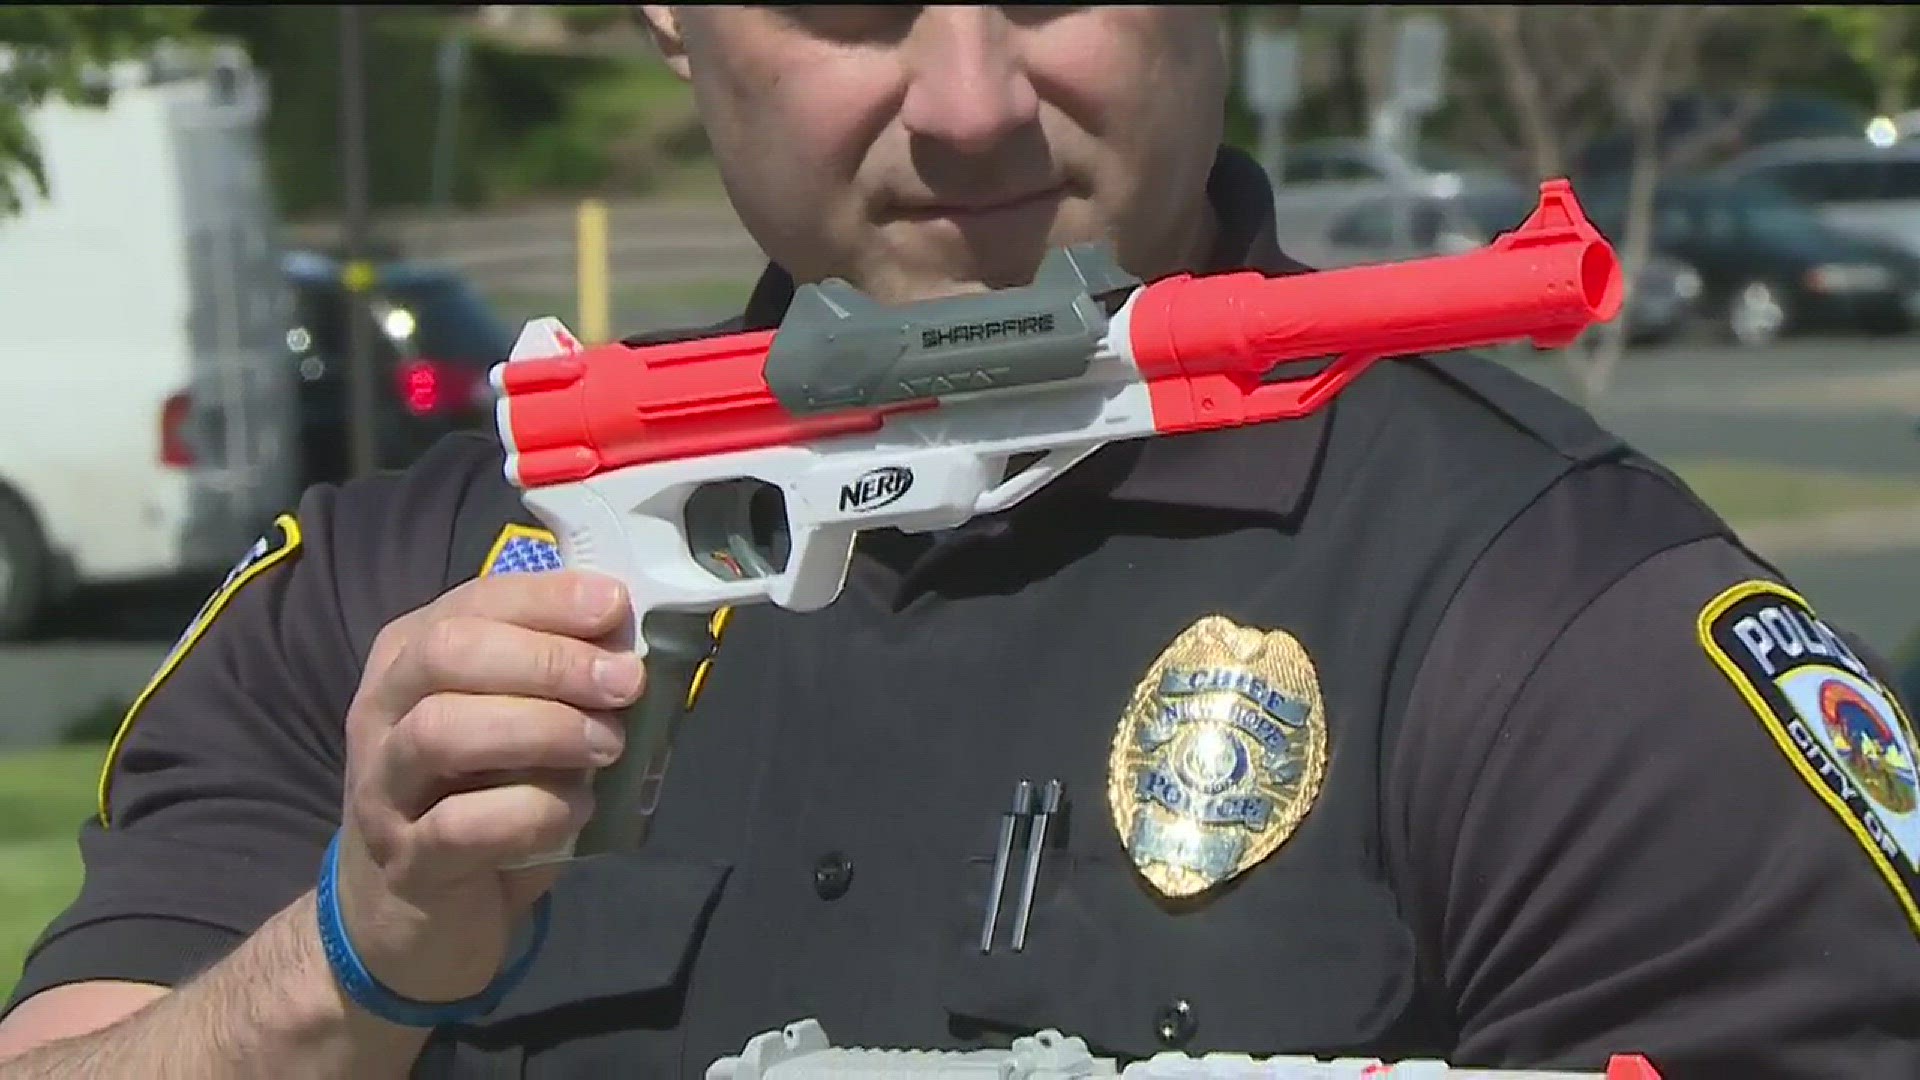 MN police chiefs have 'Nerf War' warning